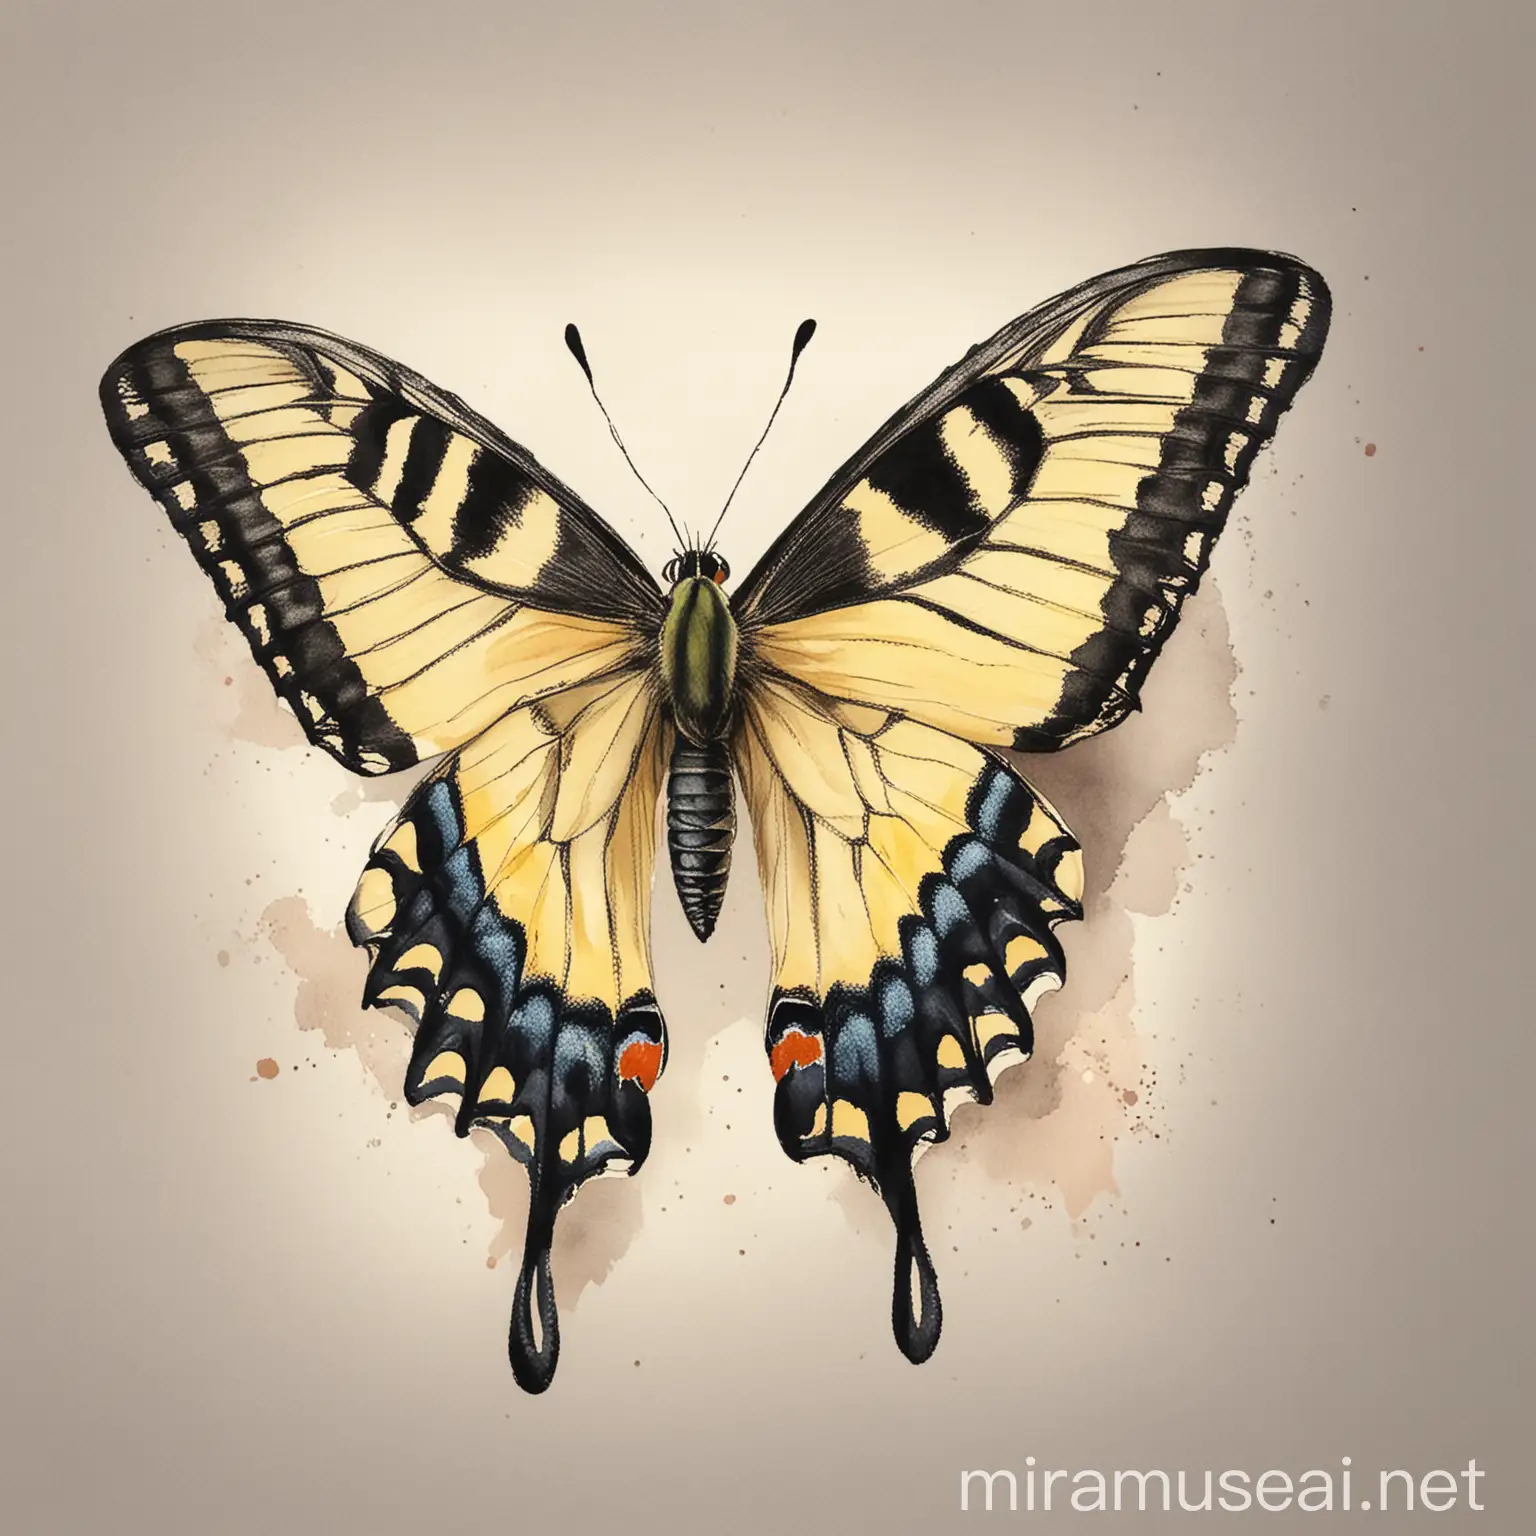 Swallowtail butterfly watercolour illustration with white background. 